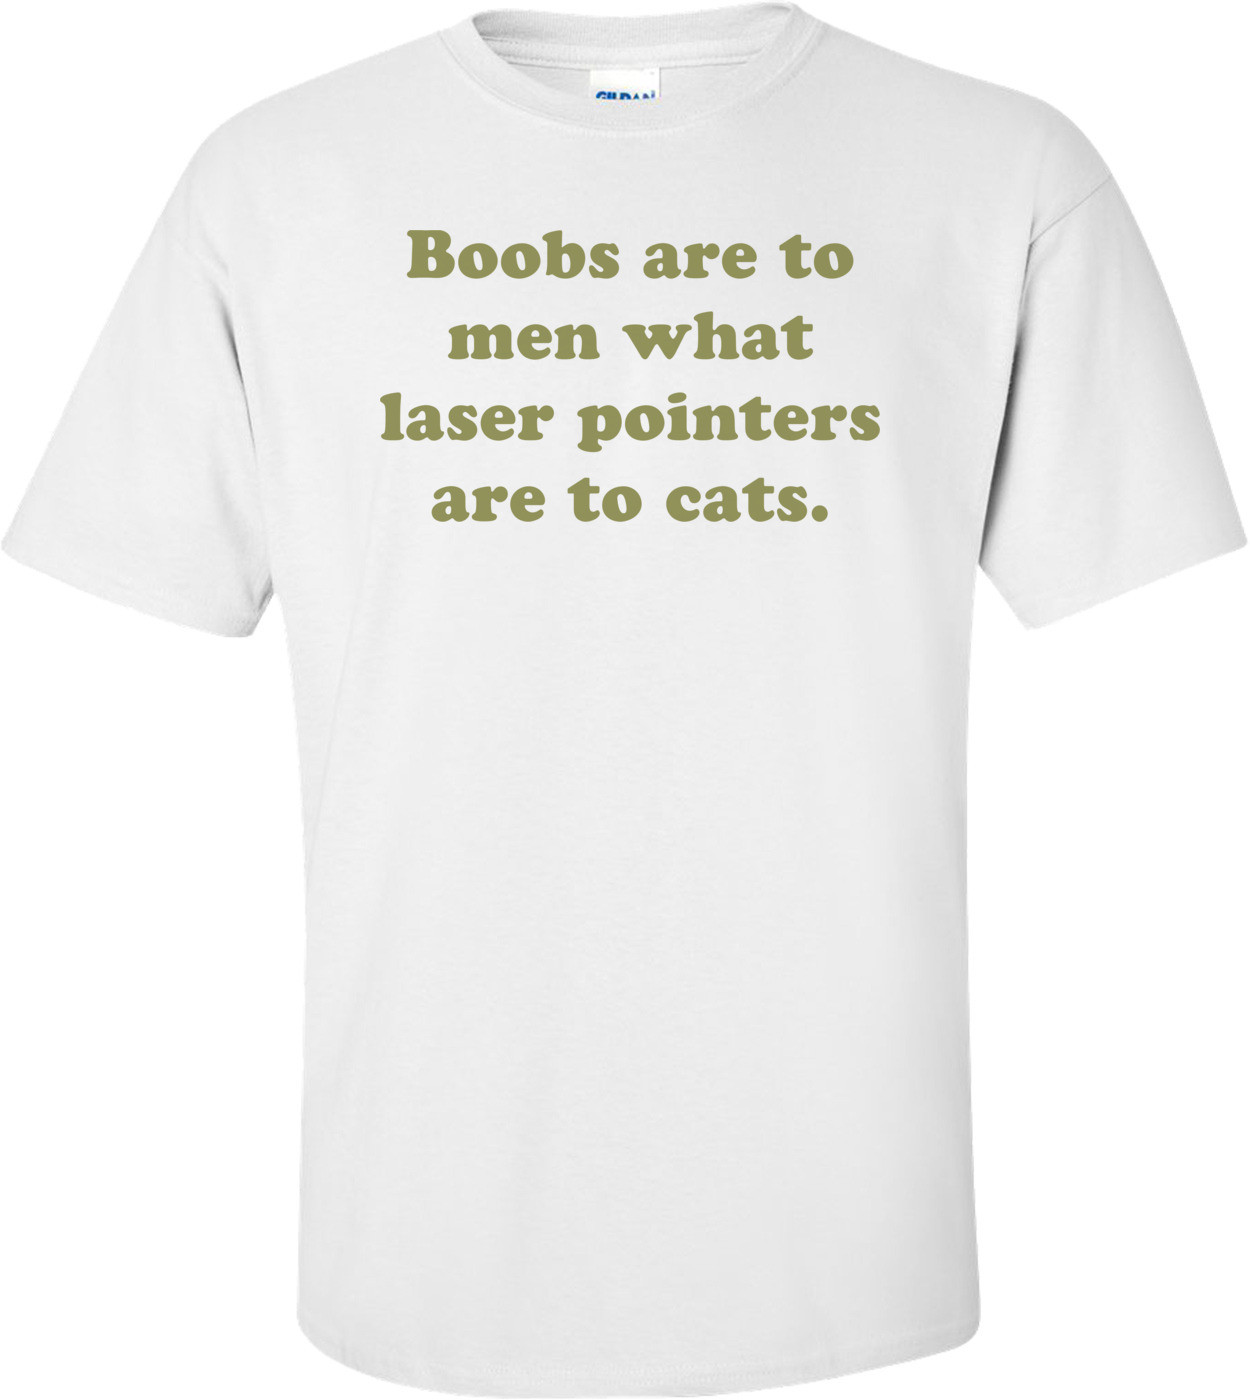 Boobs are to men what laser pointers are to cats. Shirt